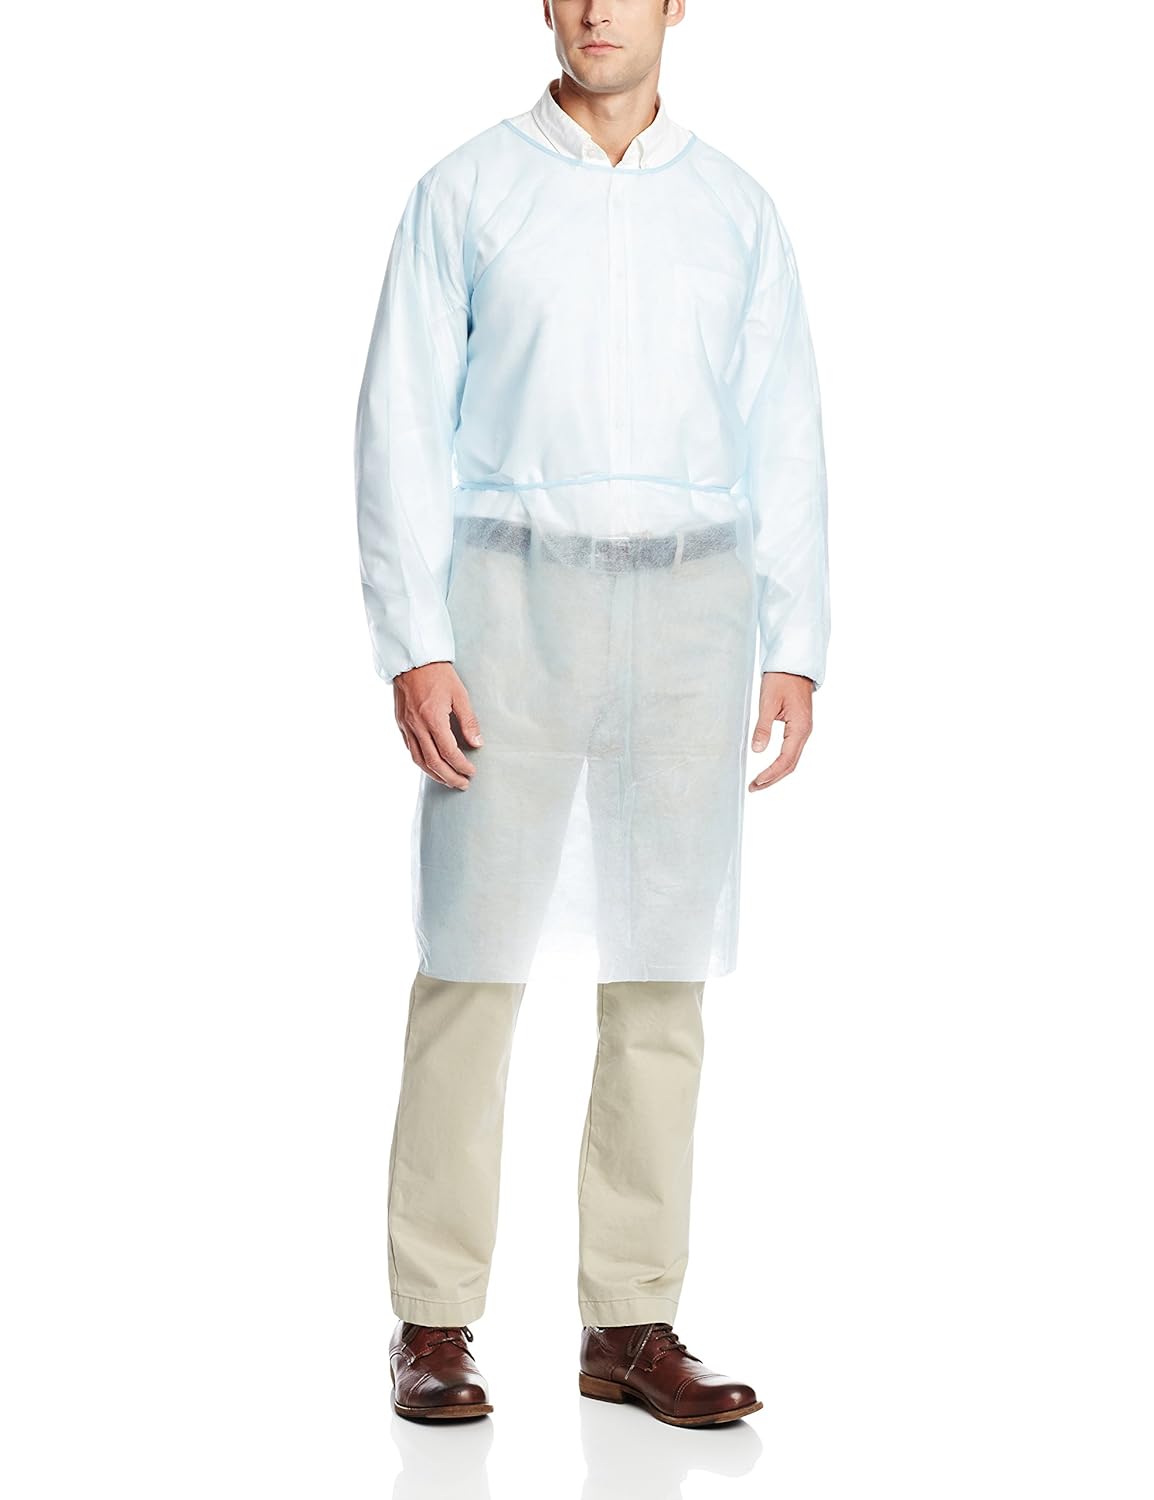 ValuMax Disposable Isolation Gown with Elastic Cuff